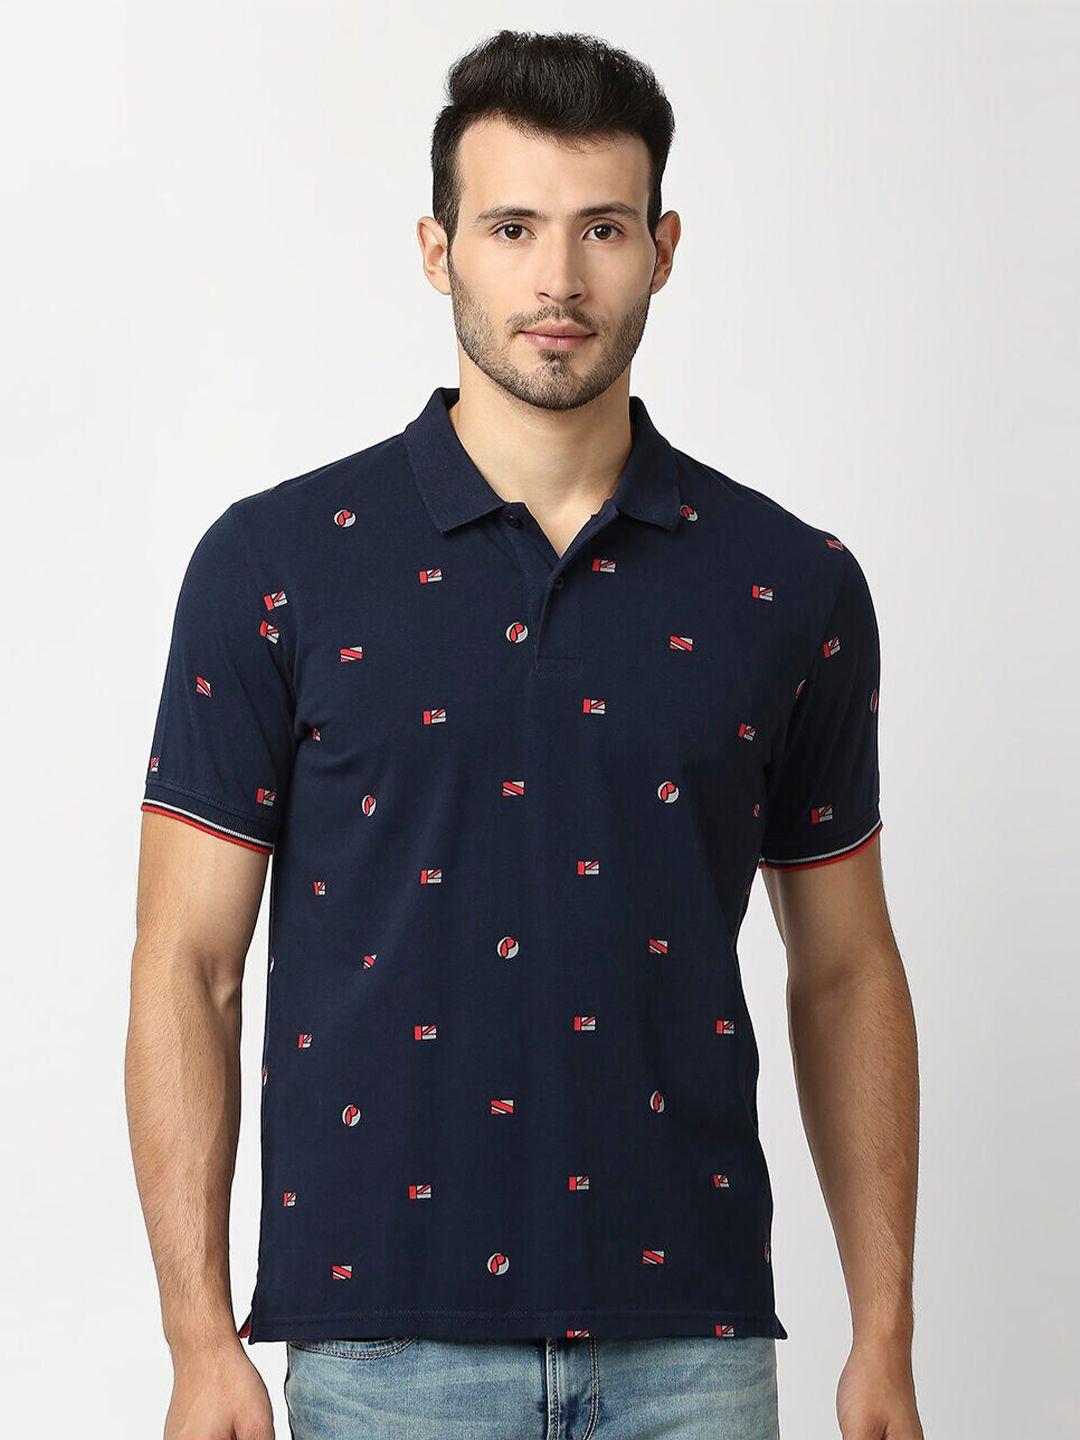 pepe jeans men navy blue printed polo collar cotton t-shirt